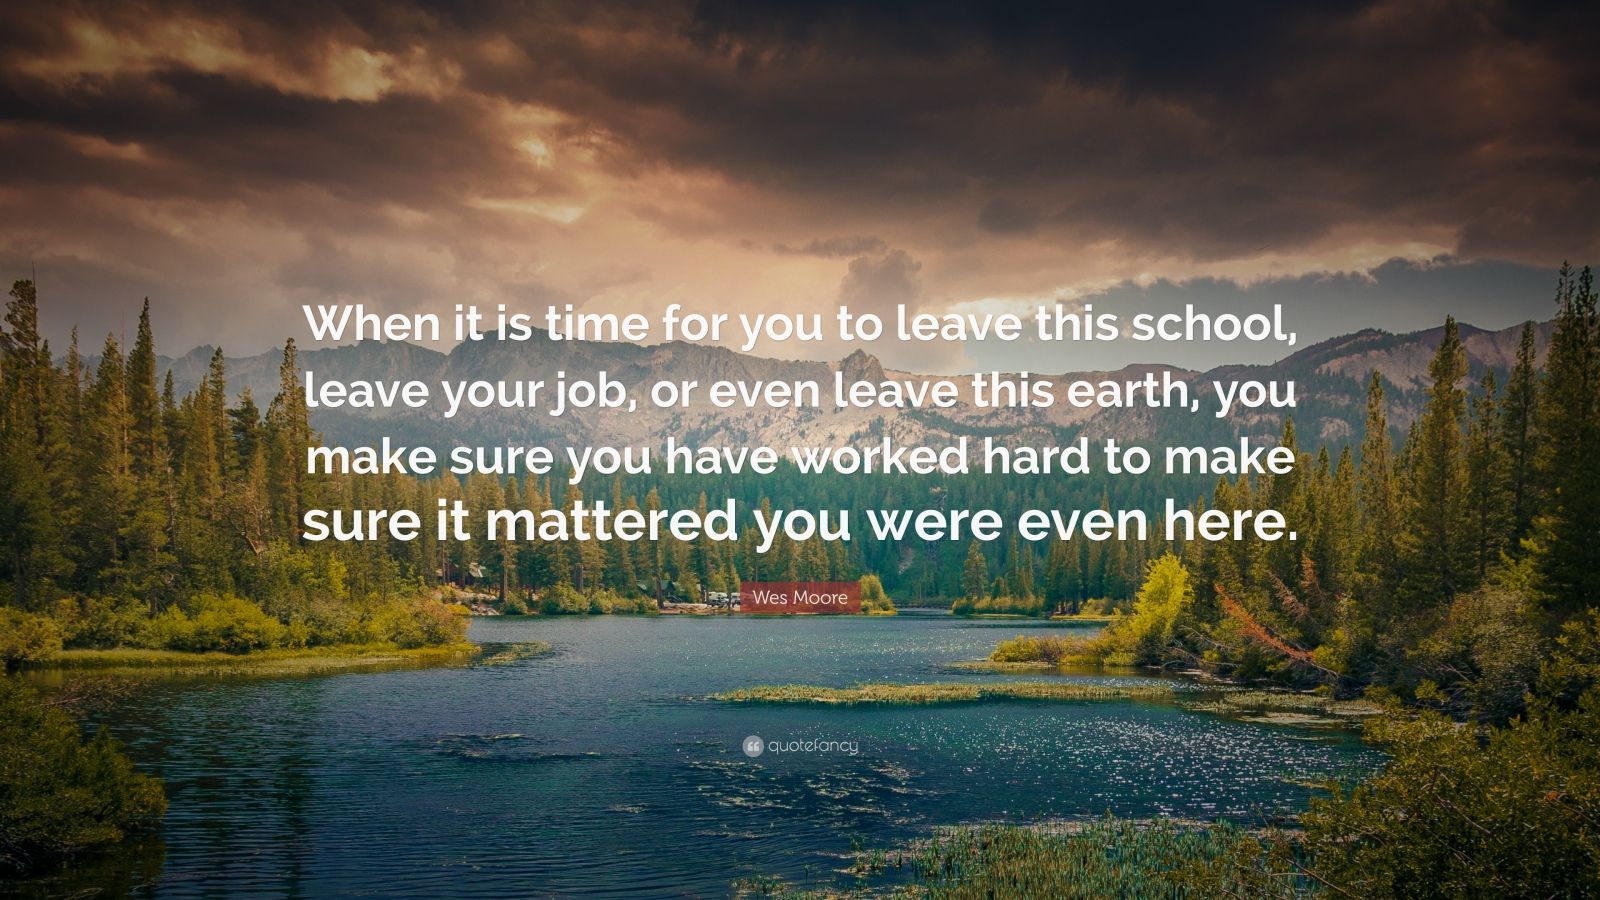 Wes Moore Quote: “When it is time for you to leave this school, leave